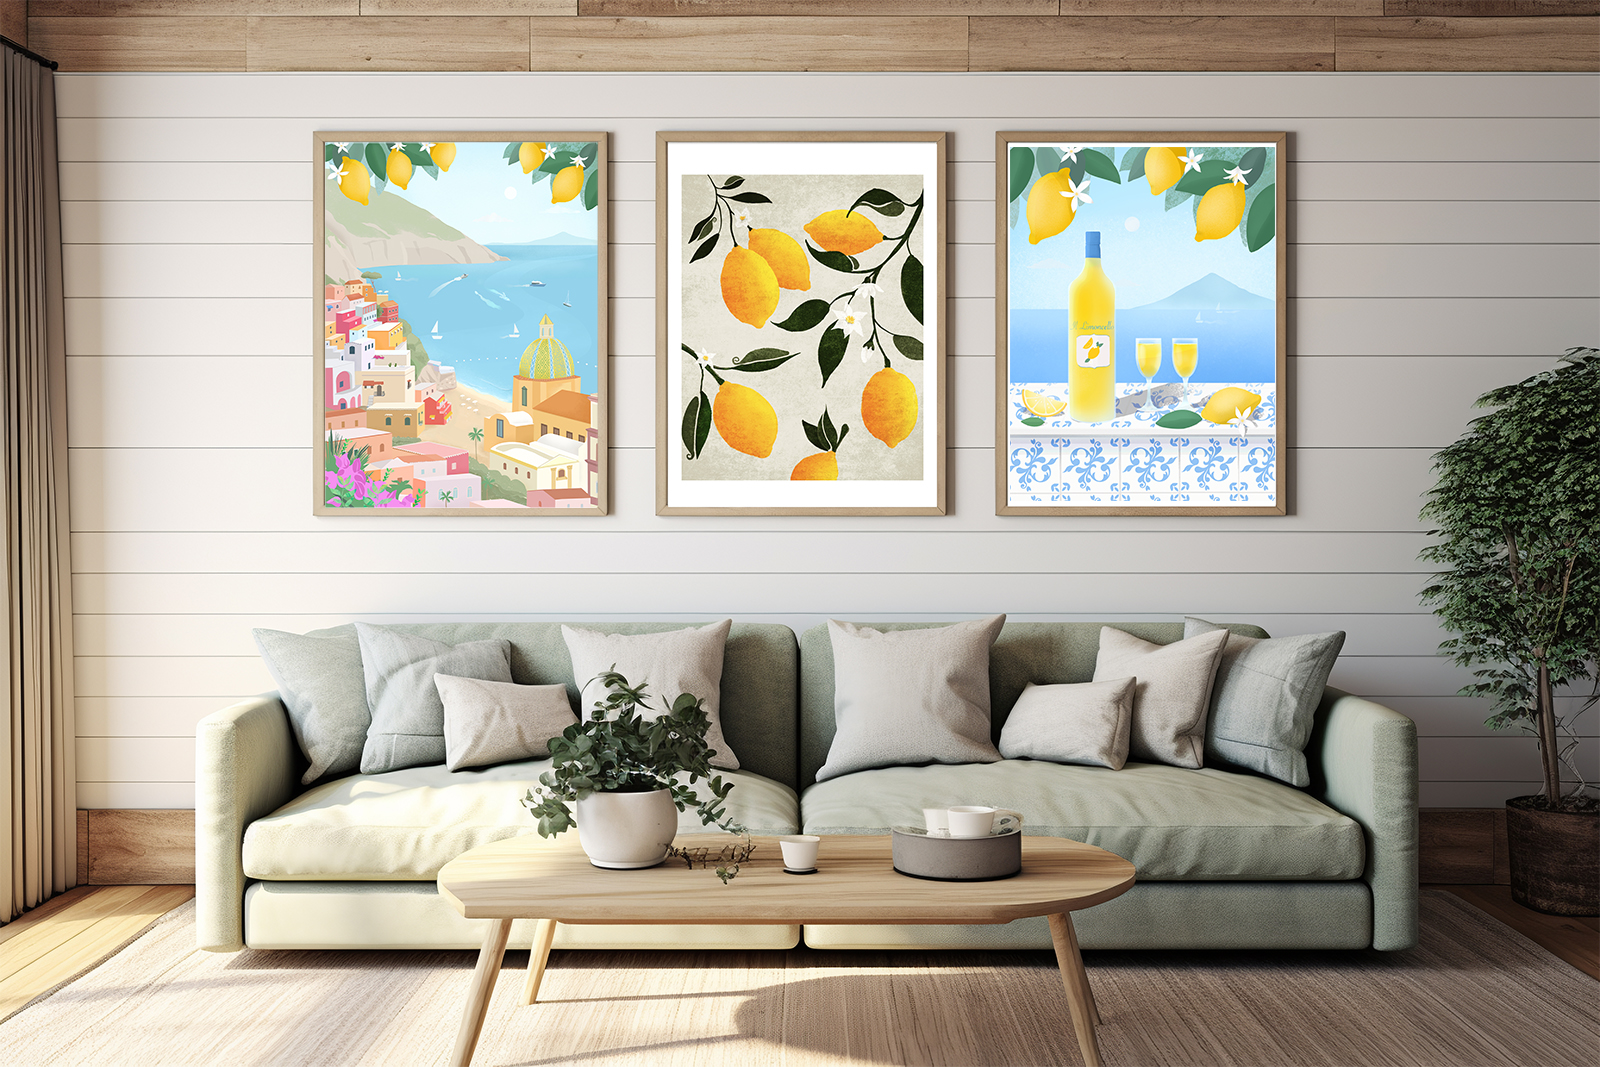 Living room gallery wall, home decor and wall art, framed art in